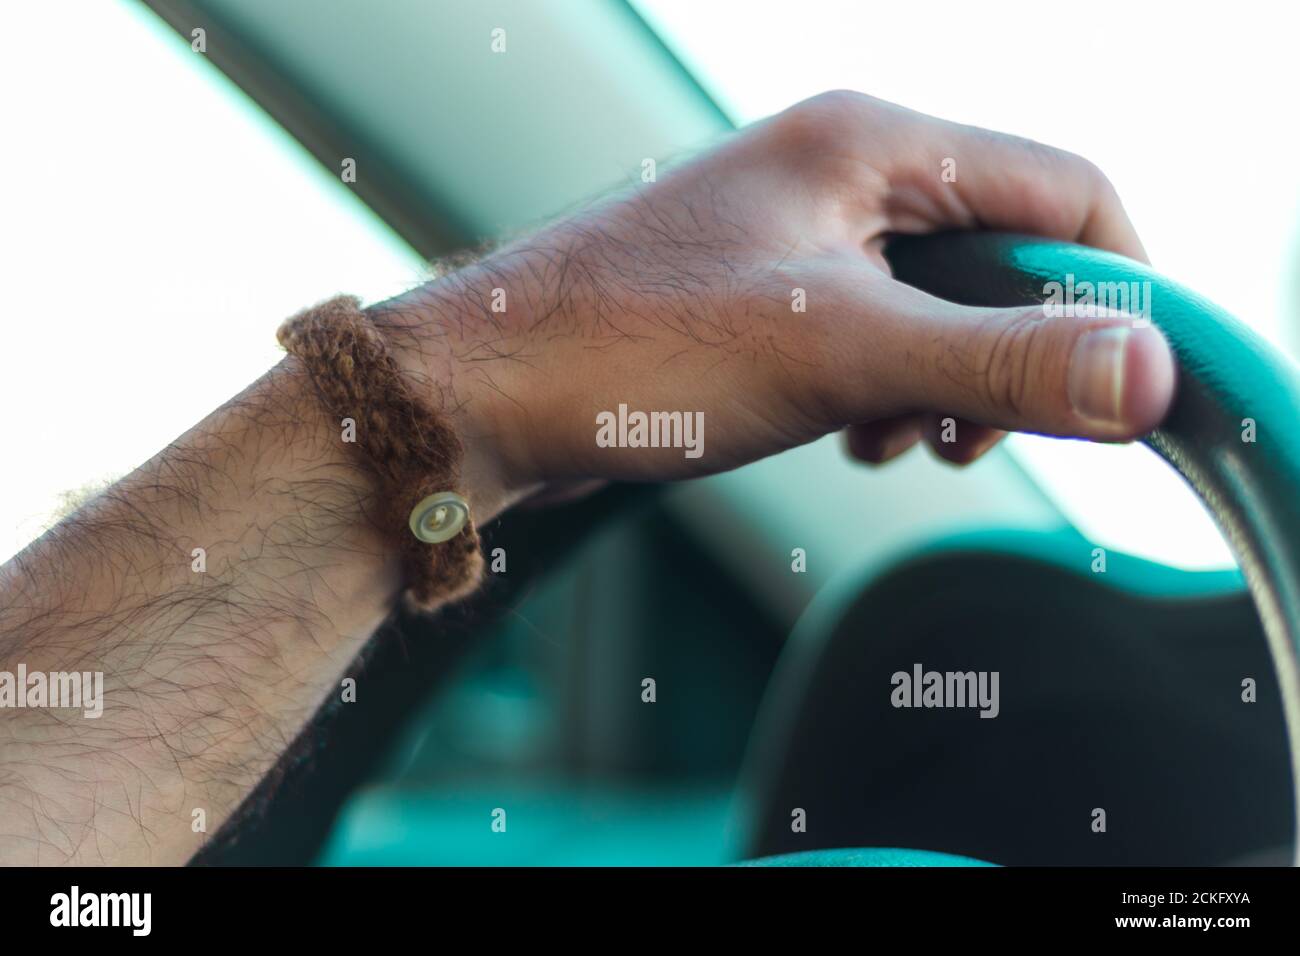 a hand on a steering wheel Stock Photo